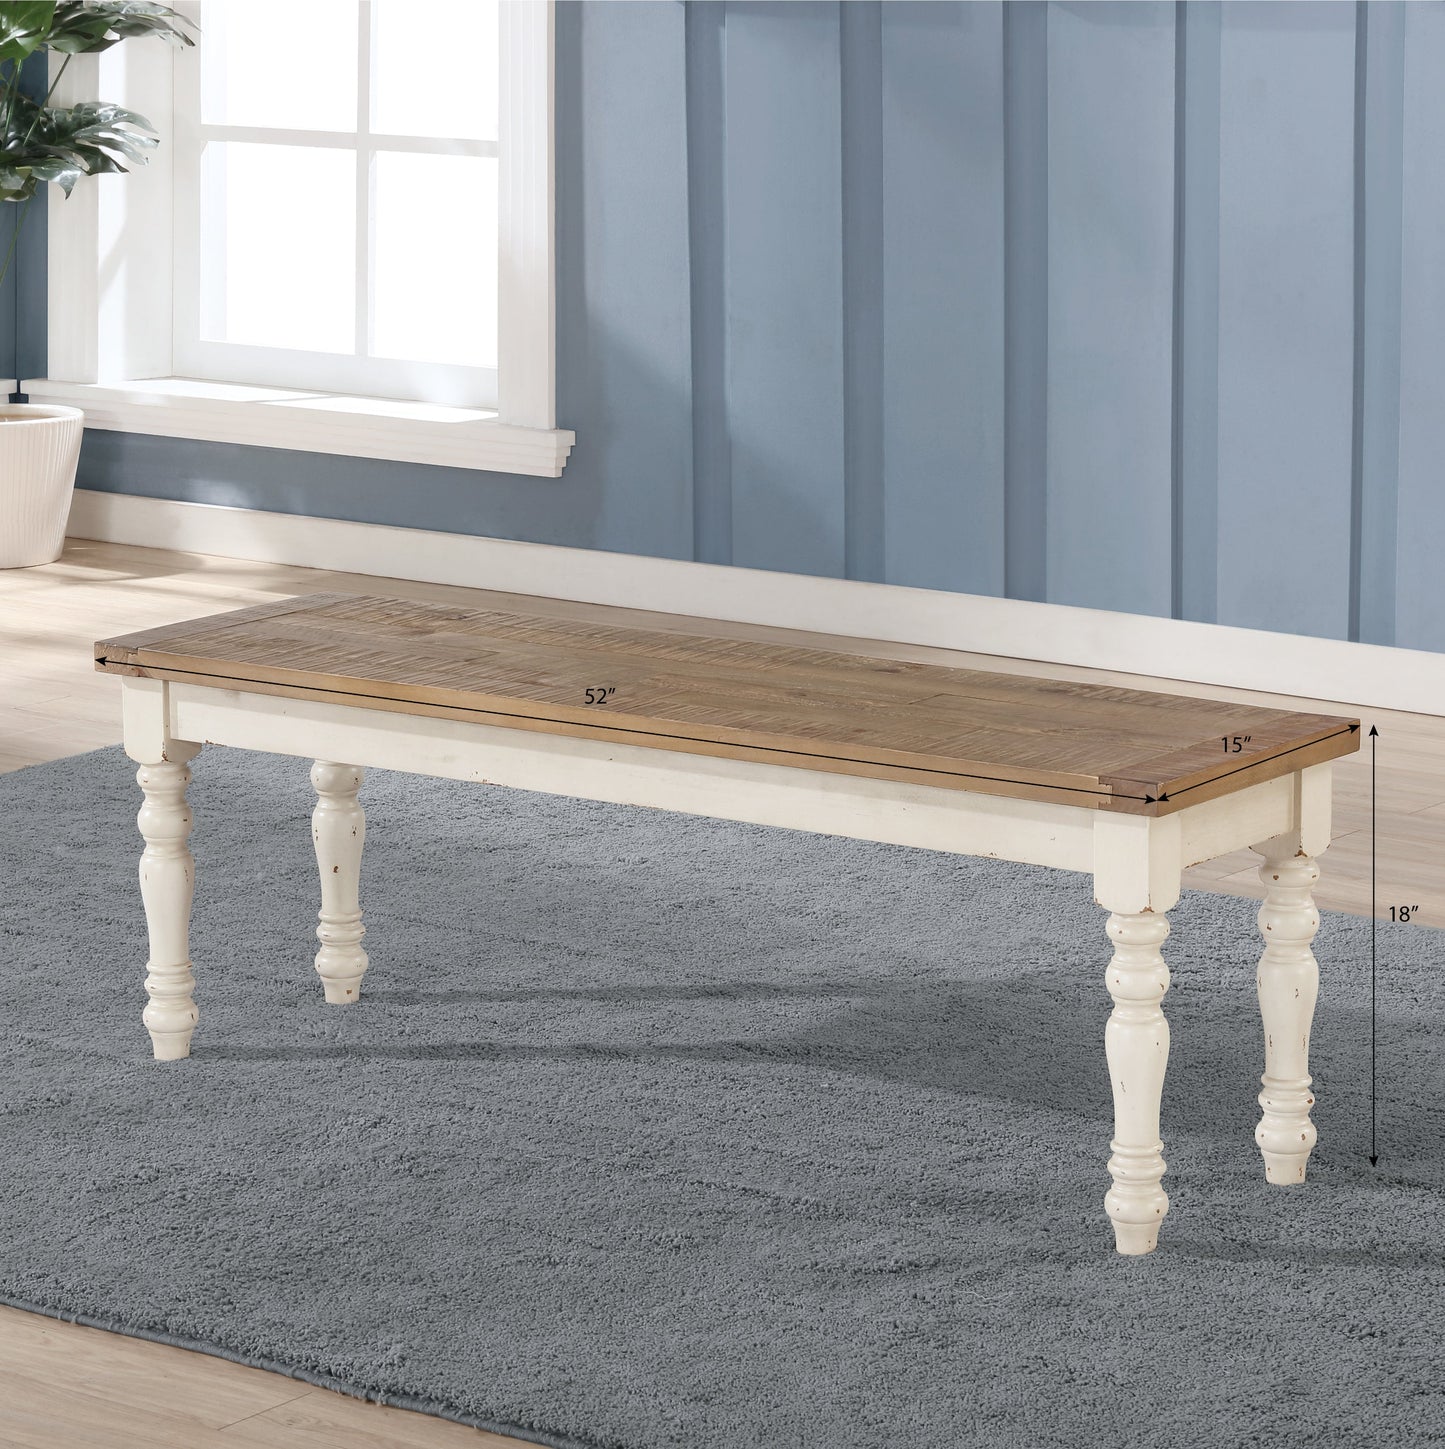 Prato Two-Tone Wood Upholstered Dining Bench, Antique White and Distressed Oak